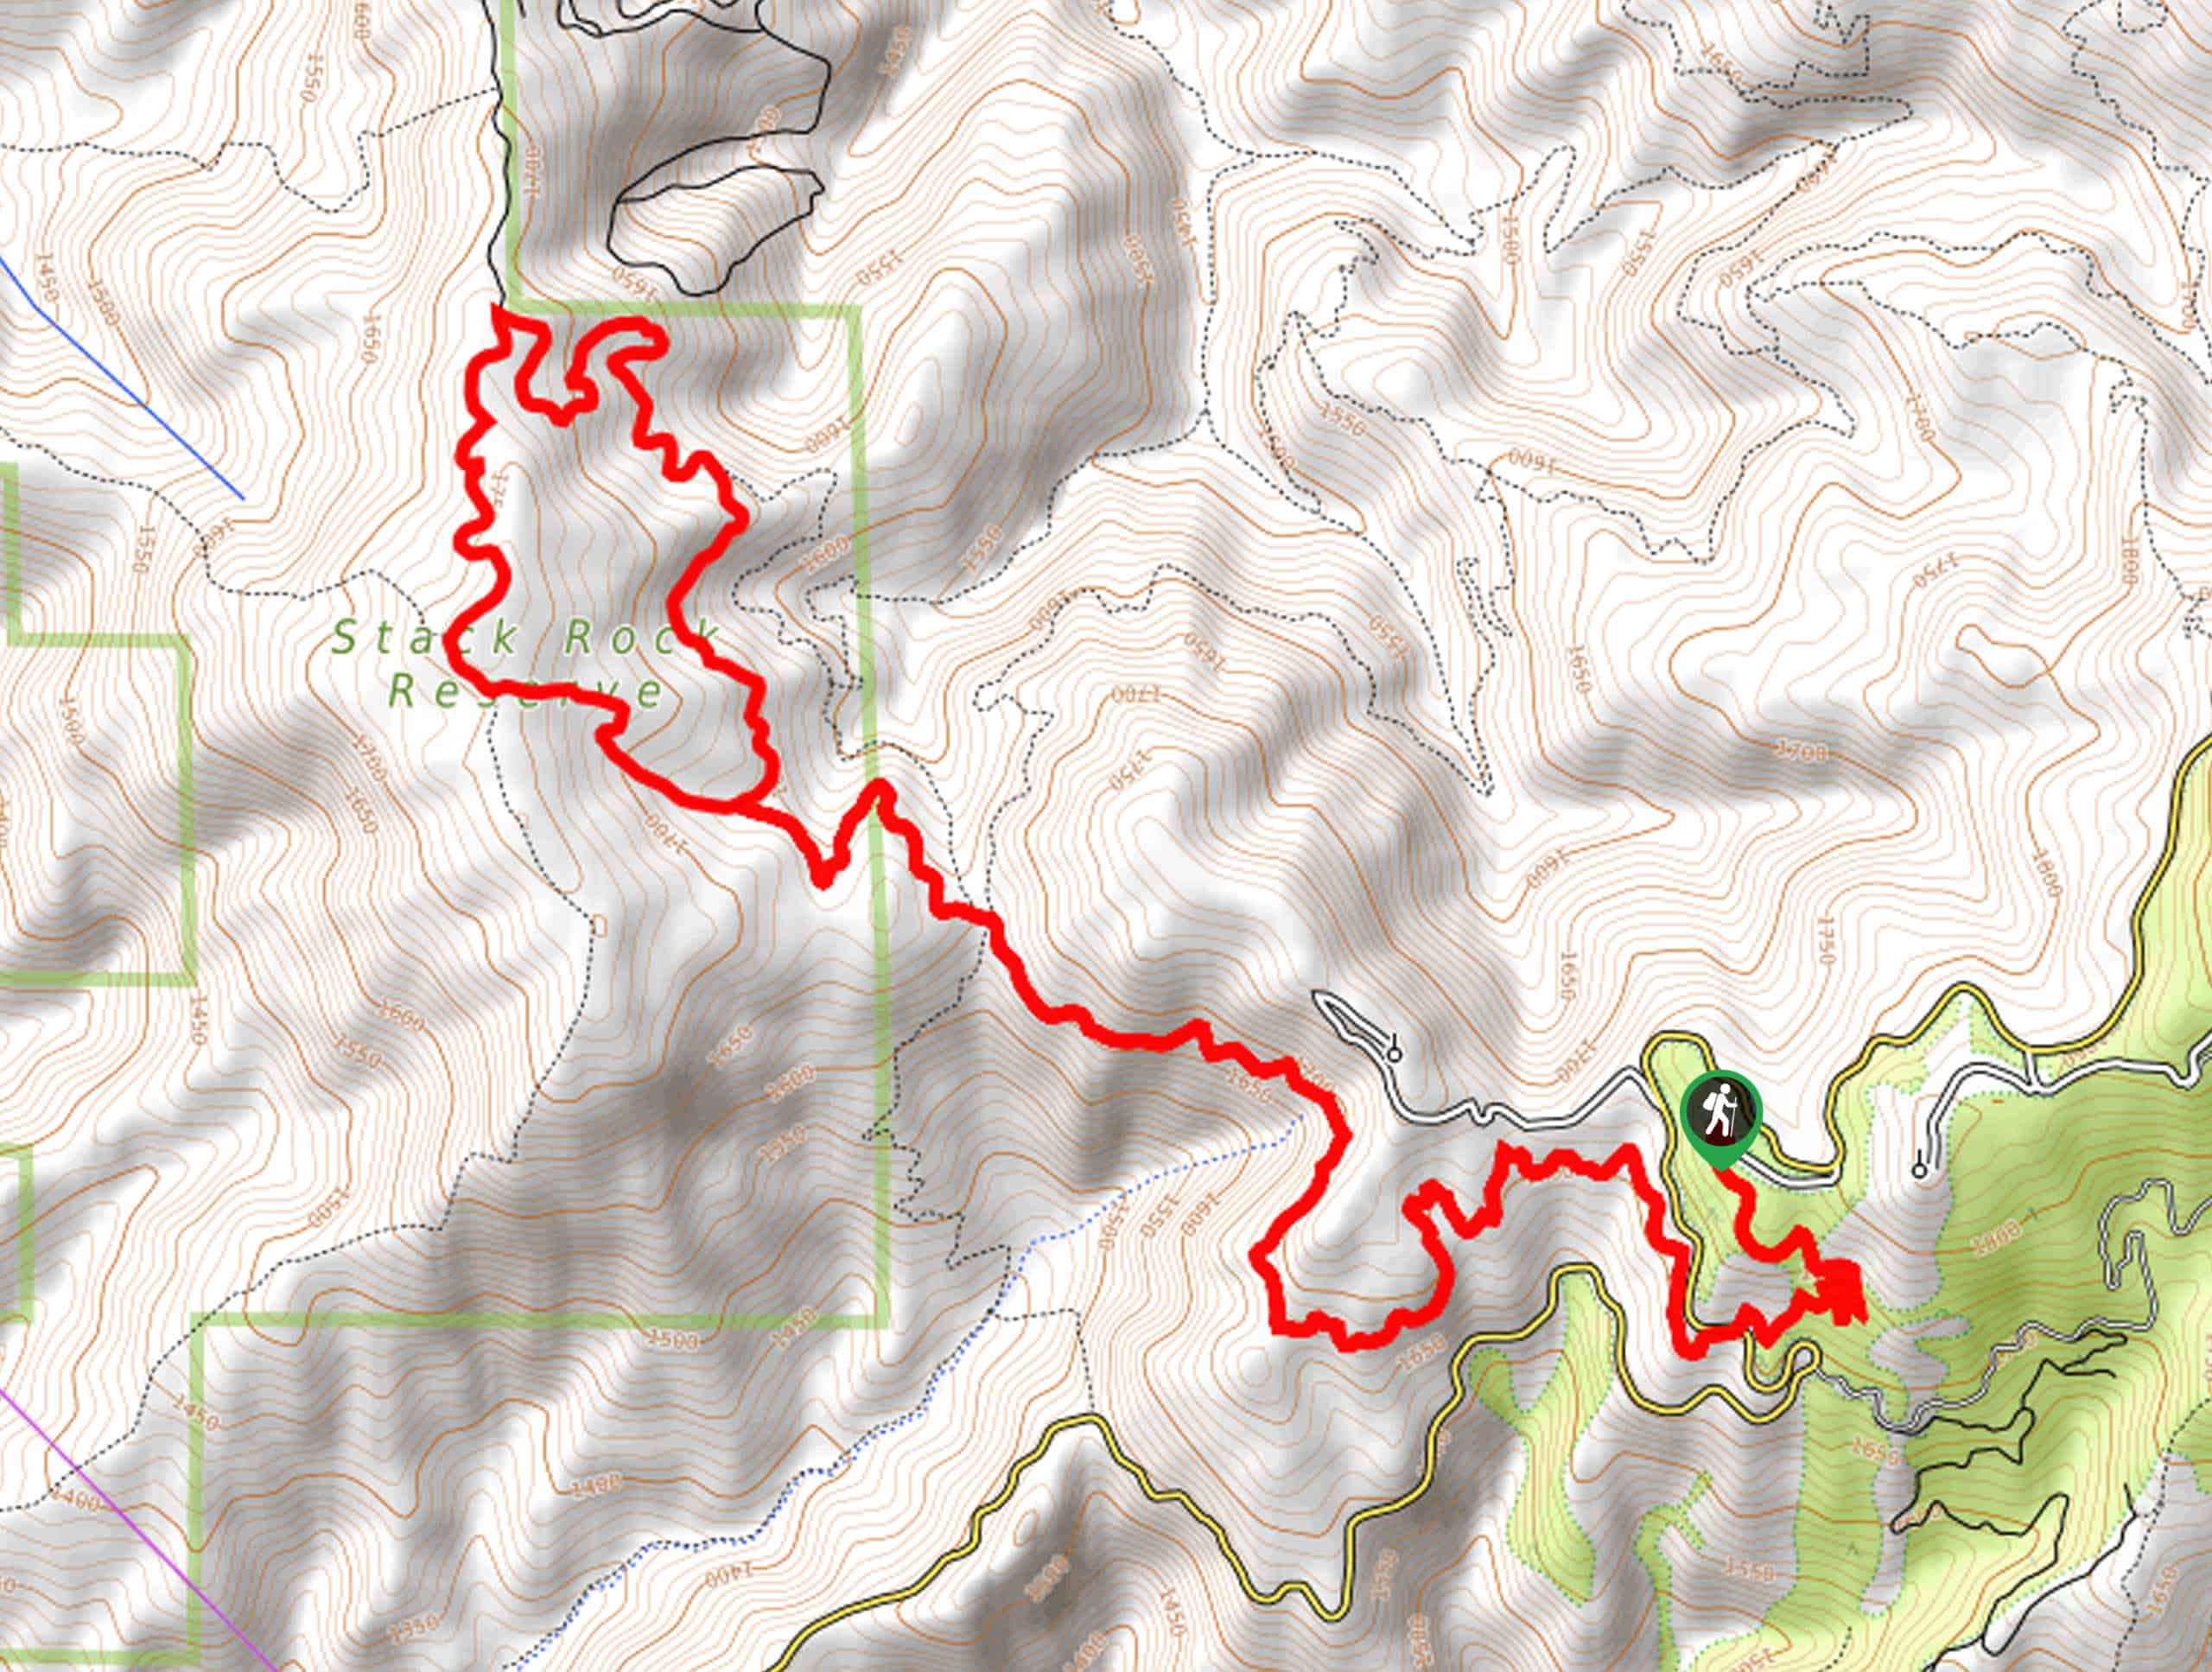 Freddy’s Stack Rock Trail Map